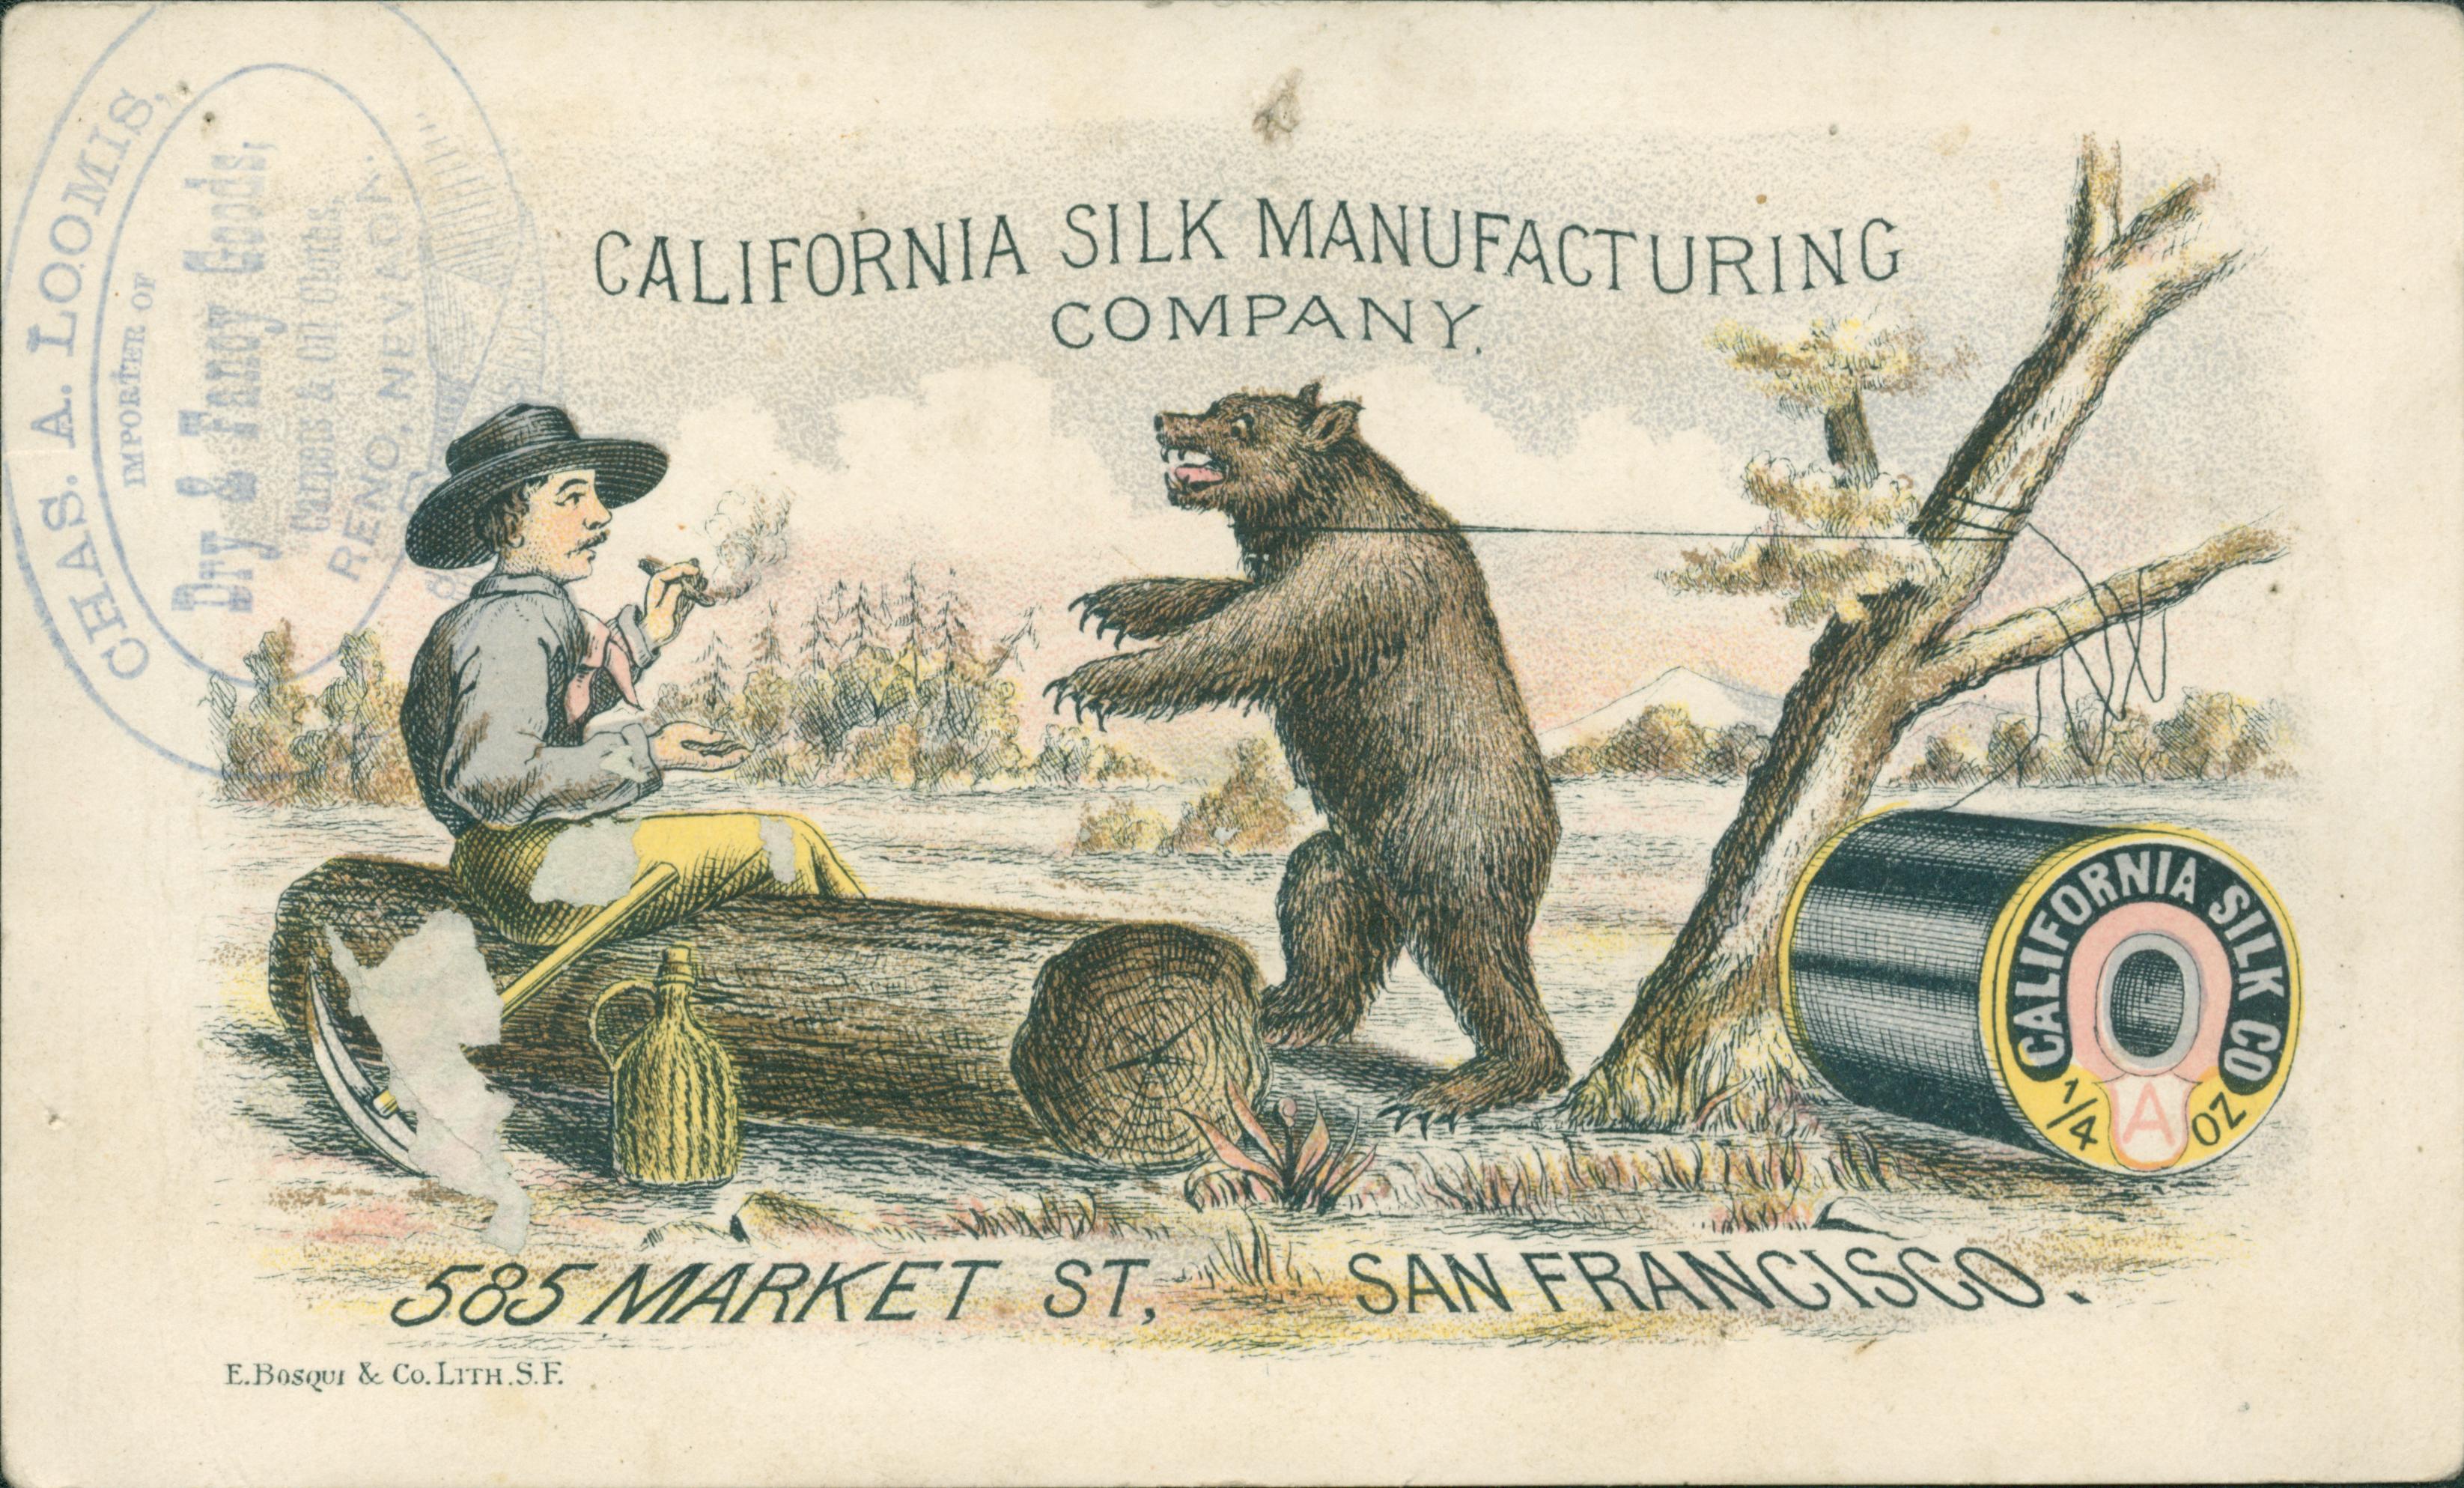 This trade card shows an angry bear tied to a tree by thread from a spool of California Silk. A man sits on a log, smoking while watching the bear.